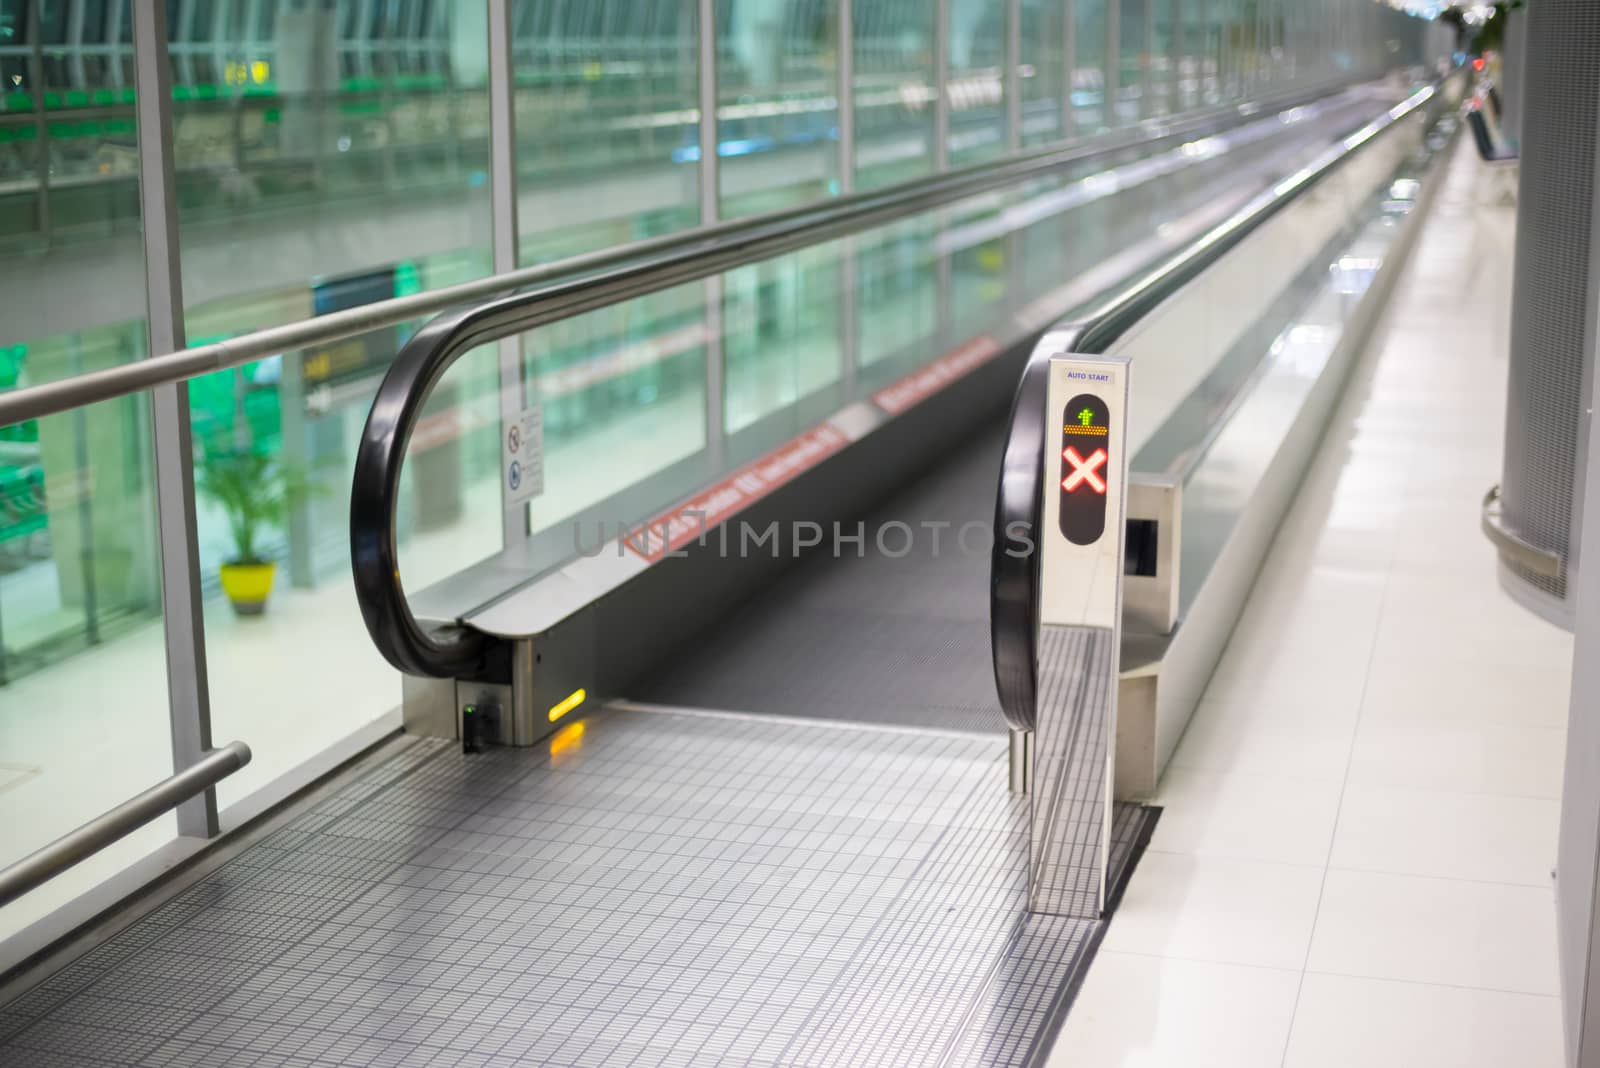 Walkways at the airport to facilitate to passengers